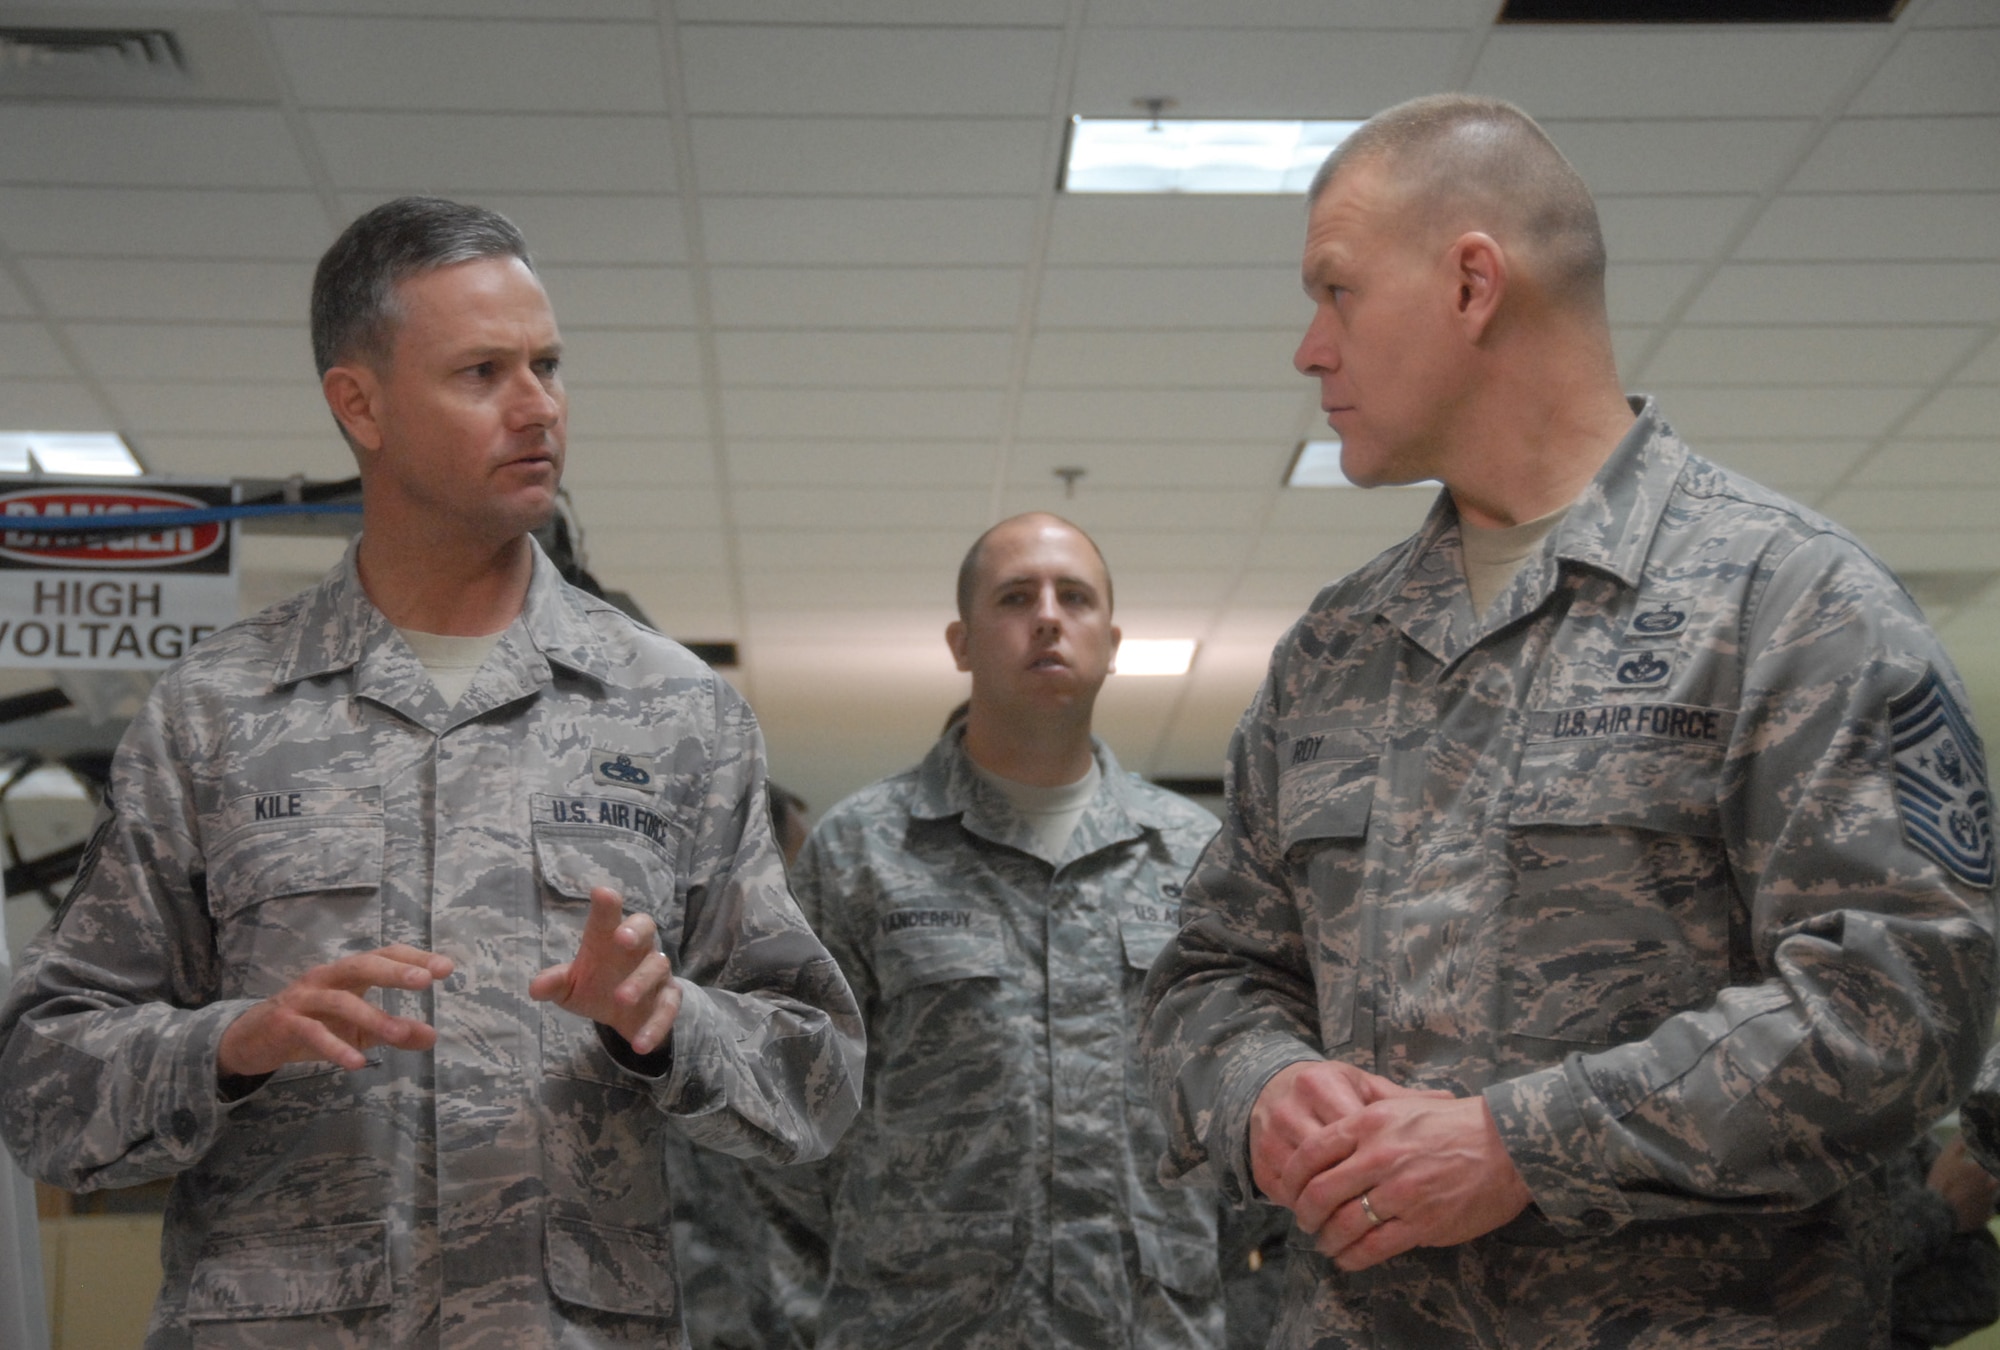 Senior Master Sgt. Kevin Kile, 16th Electronic Warfare Squadron, speaks to Chief Master Sgt. of the Air Force James Roy about the electronic warfare test mission March 18 at Eglin Air Force Base, Fla.  The CMSAF’s two-day visit to the base included tours of units within the various wings and speaking with junior enlisted and senior leadership on Air Force issues.  (U.S. Air Force photo/Samuel King Jr.)